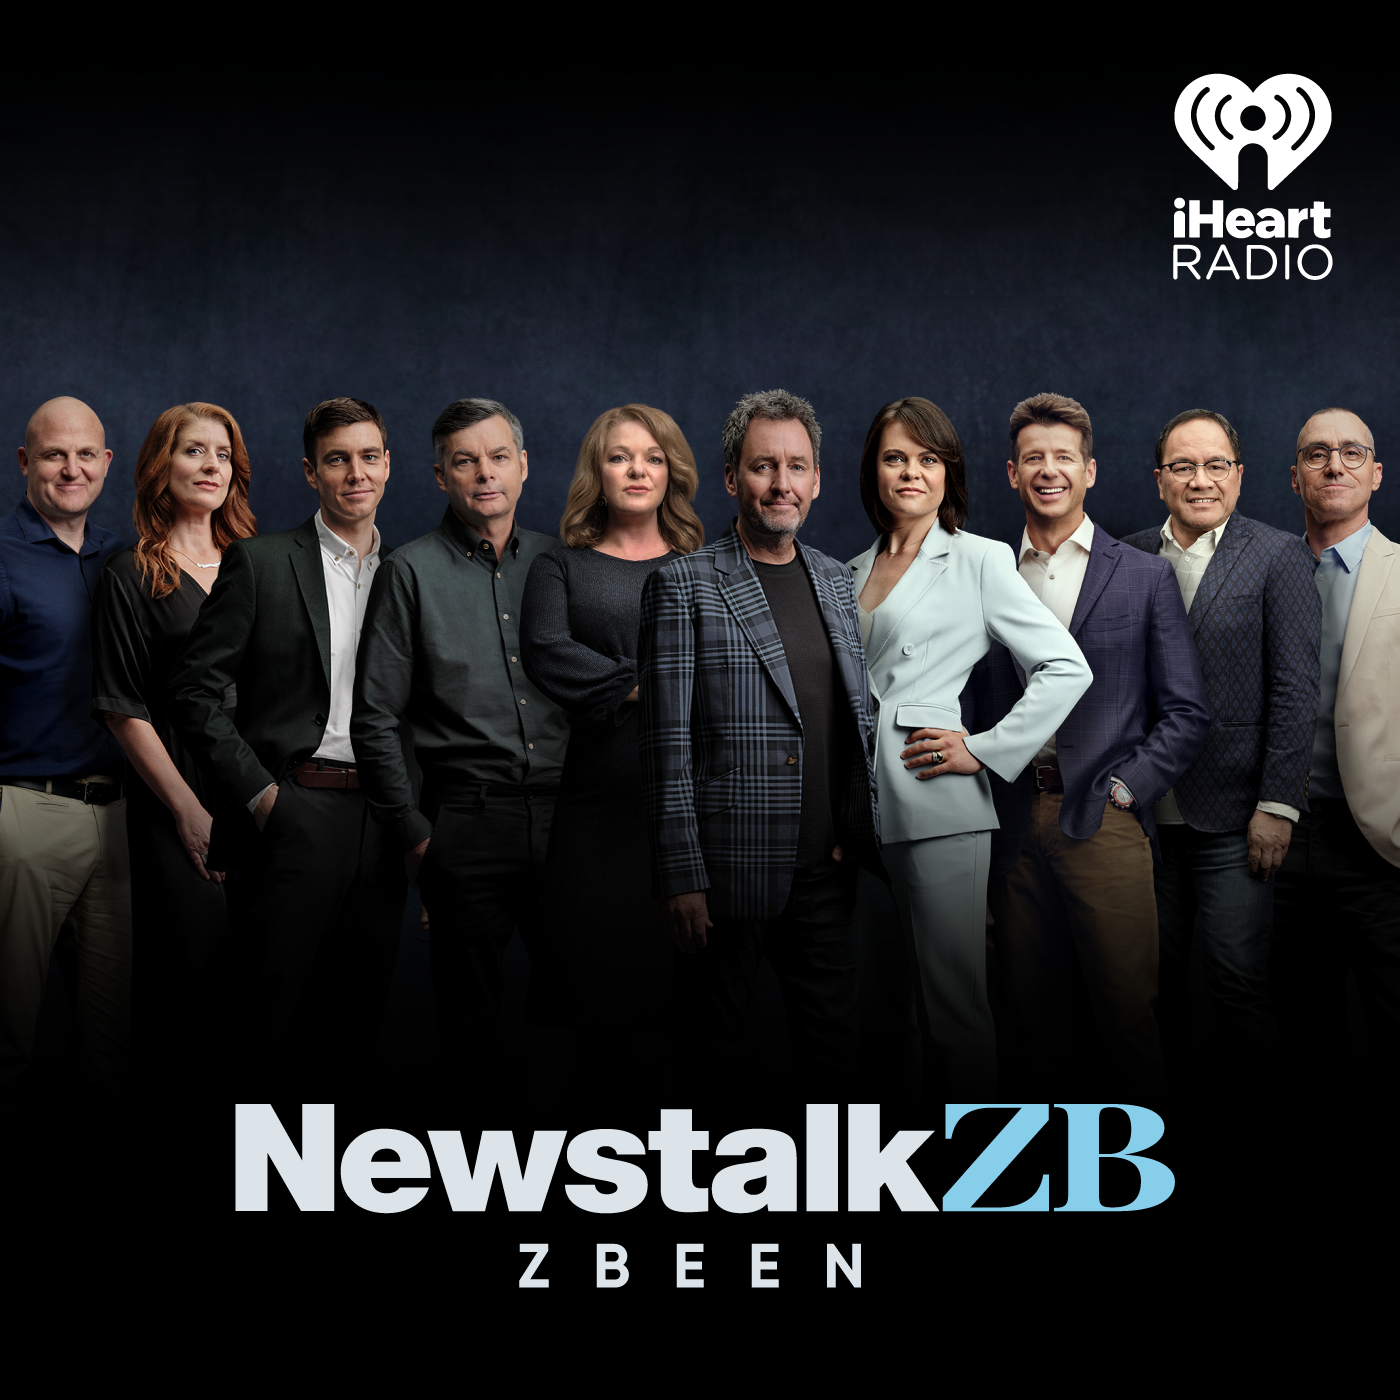 NEWSTALK ZBEEN: One Size Doesn't Fit All